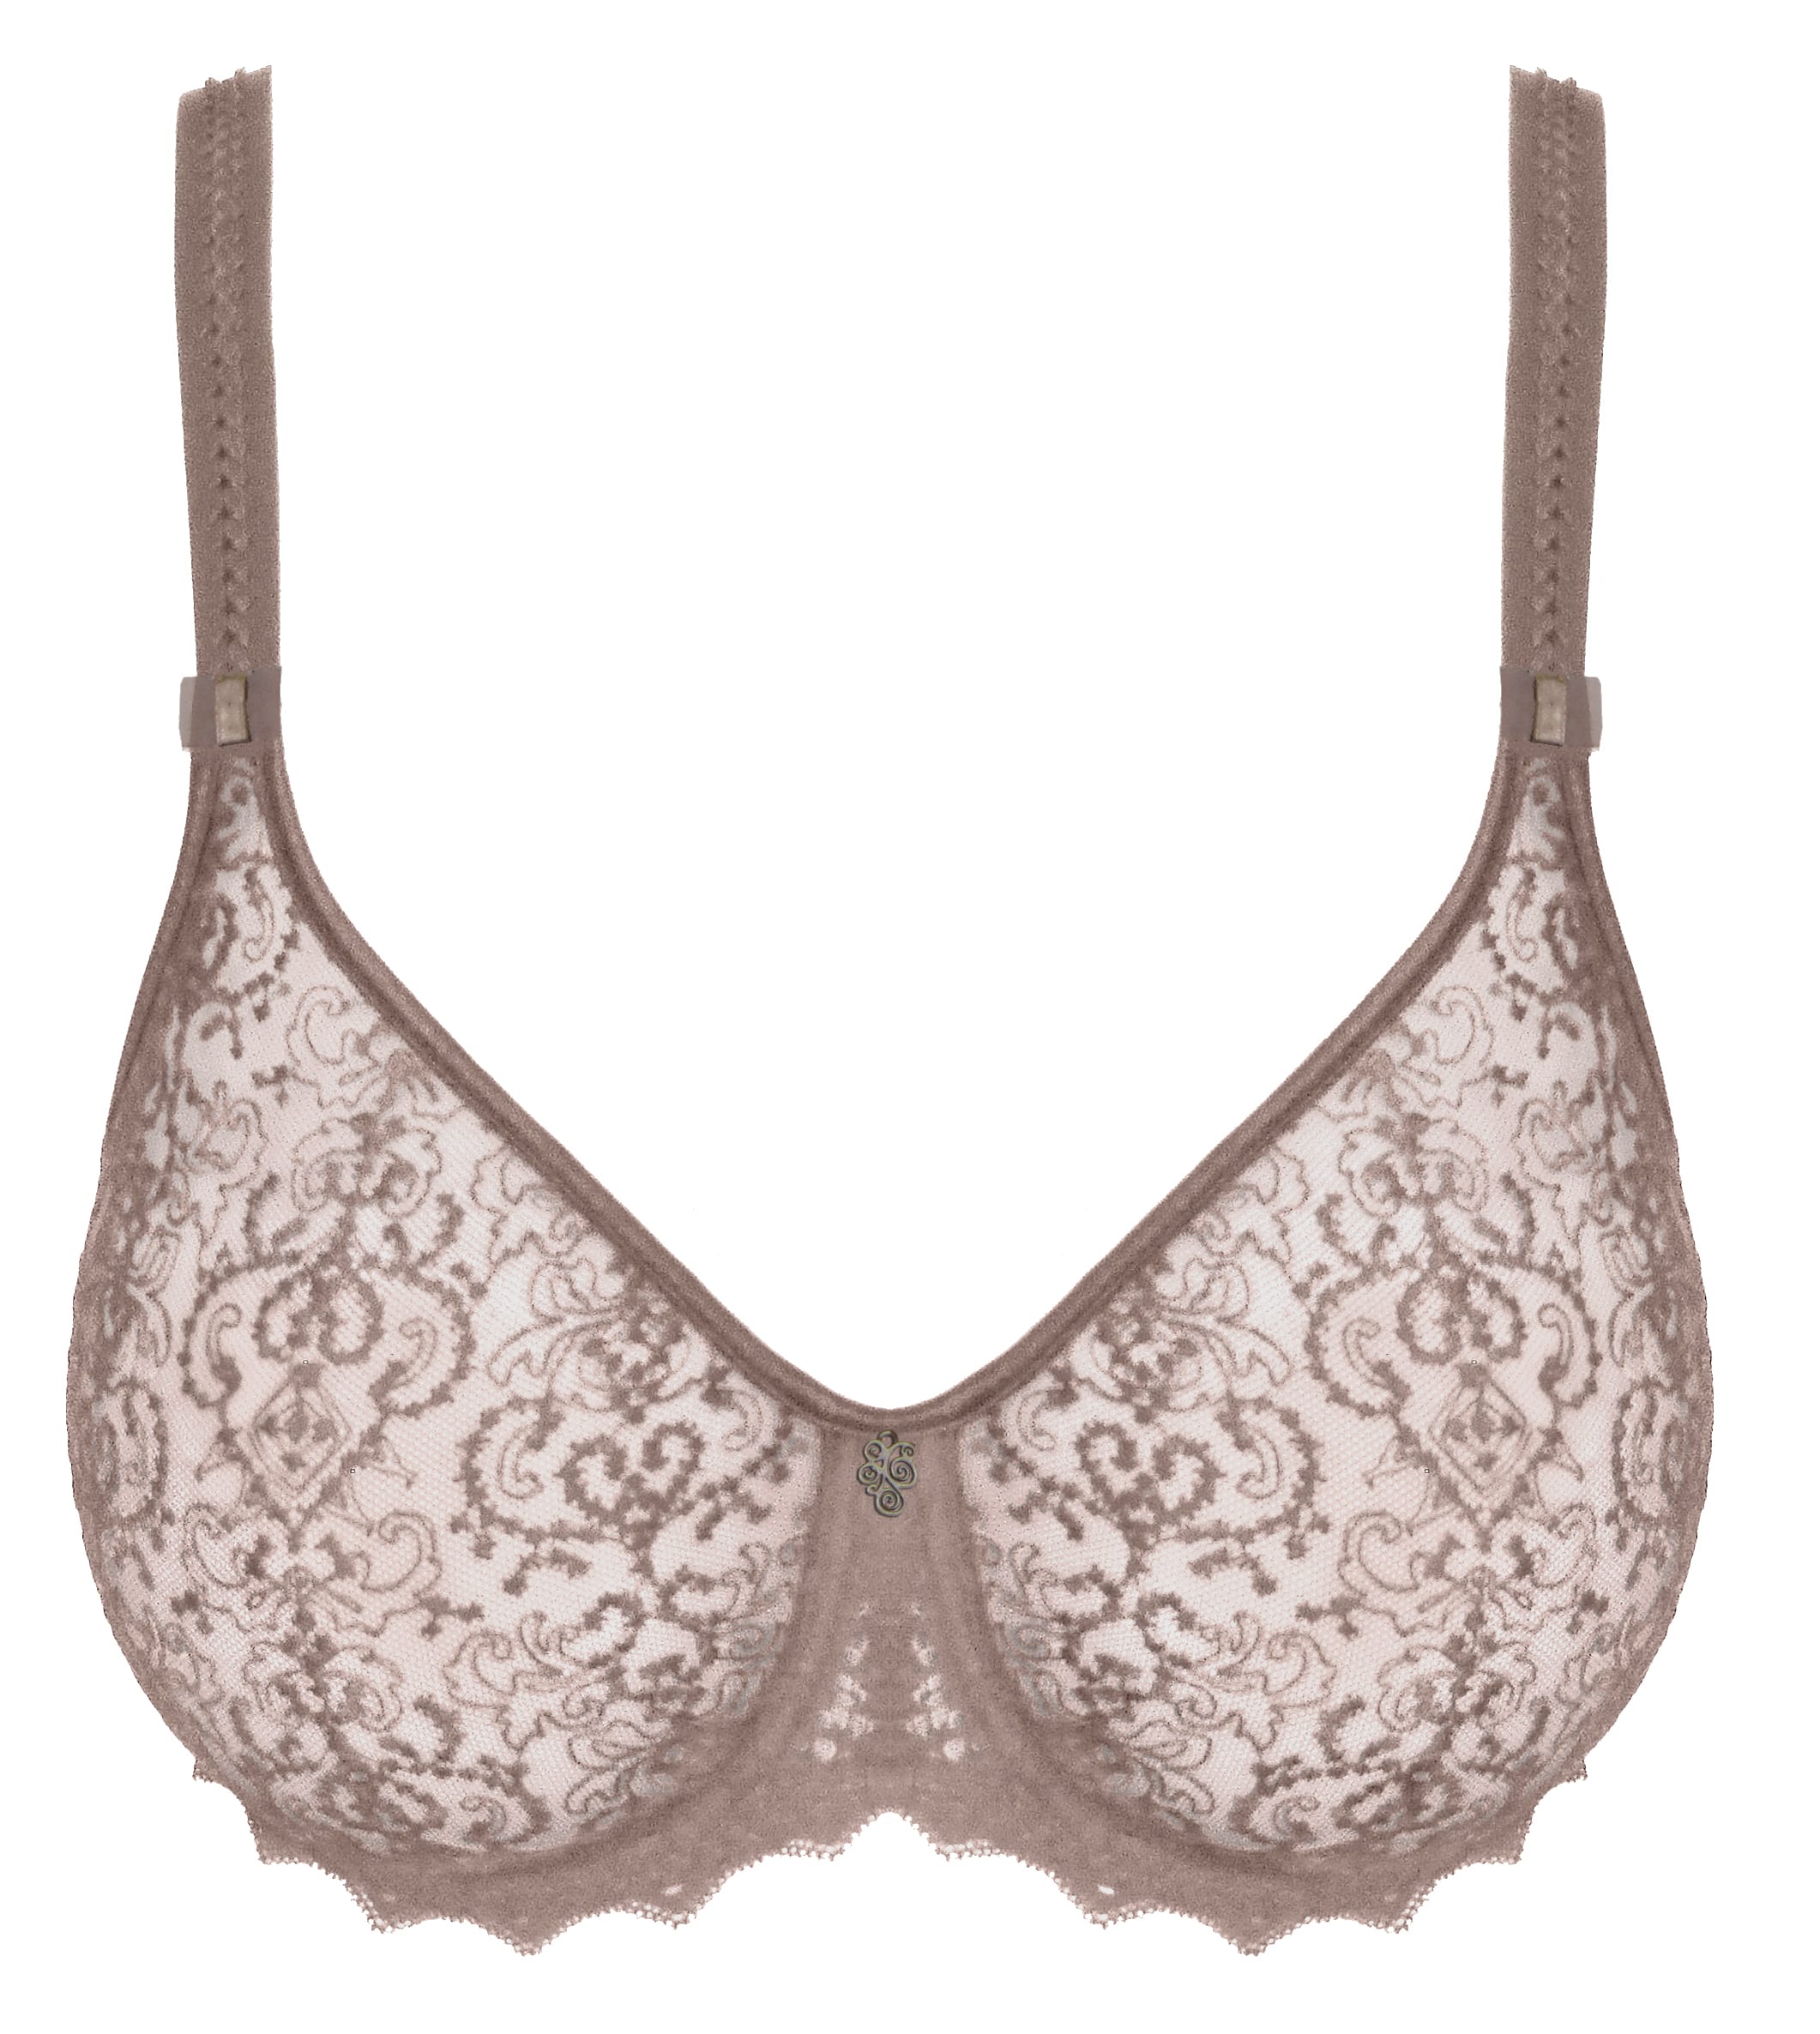 Papillon Unlined underwired cotton bra CUP B S335: for sale at 10.19€ on